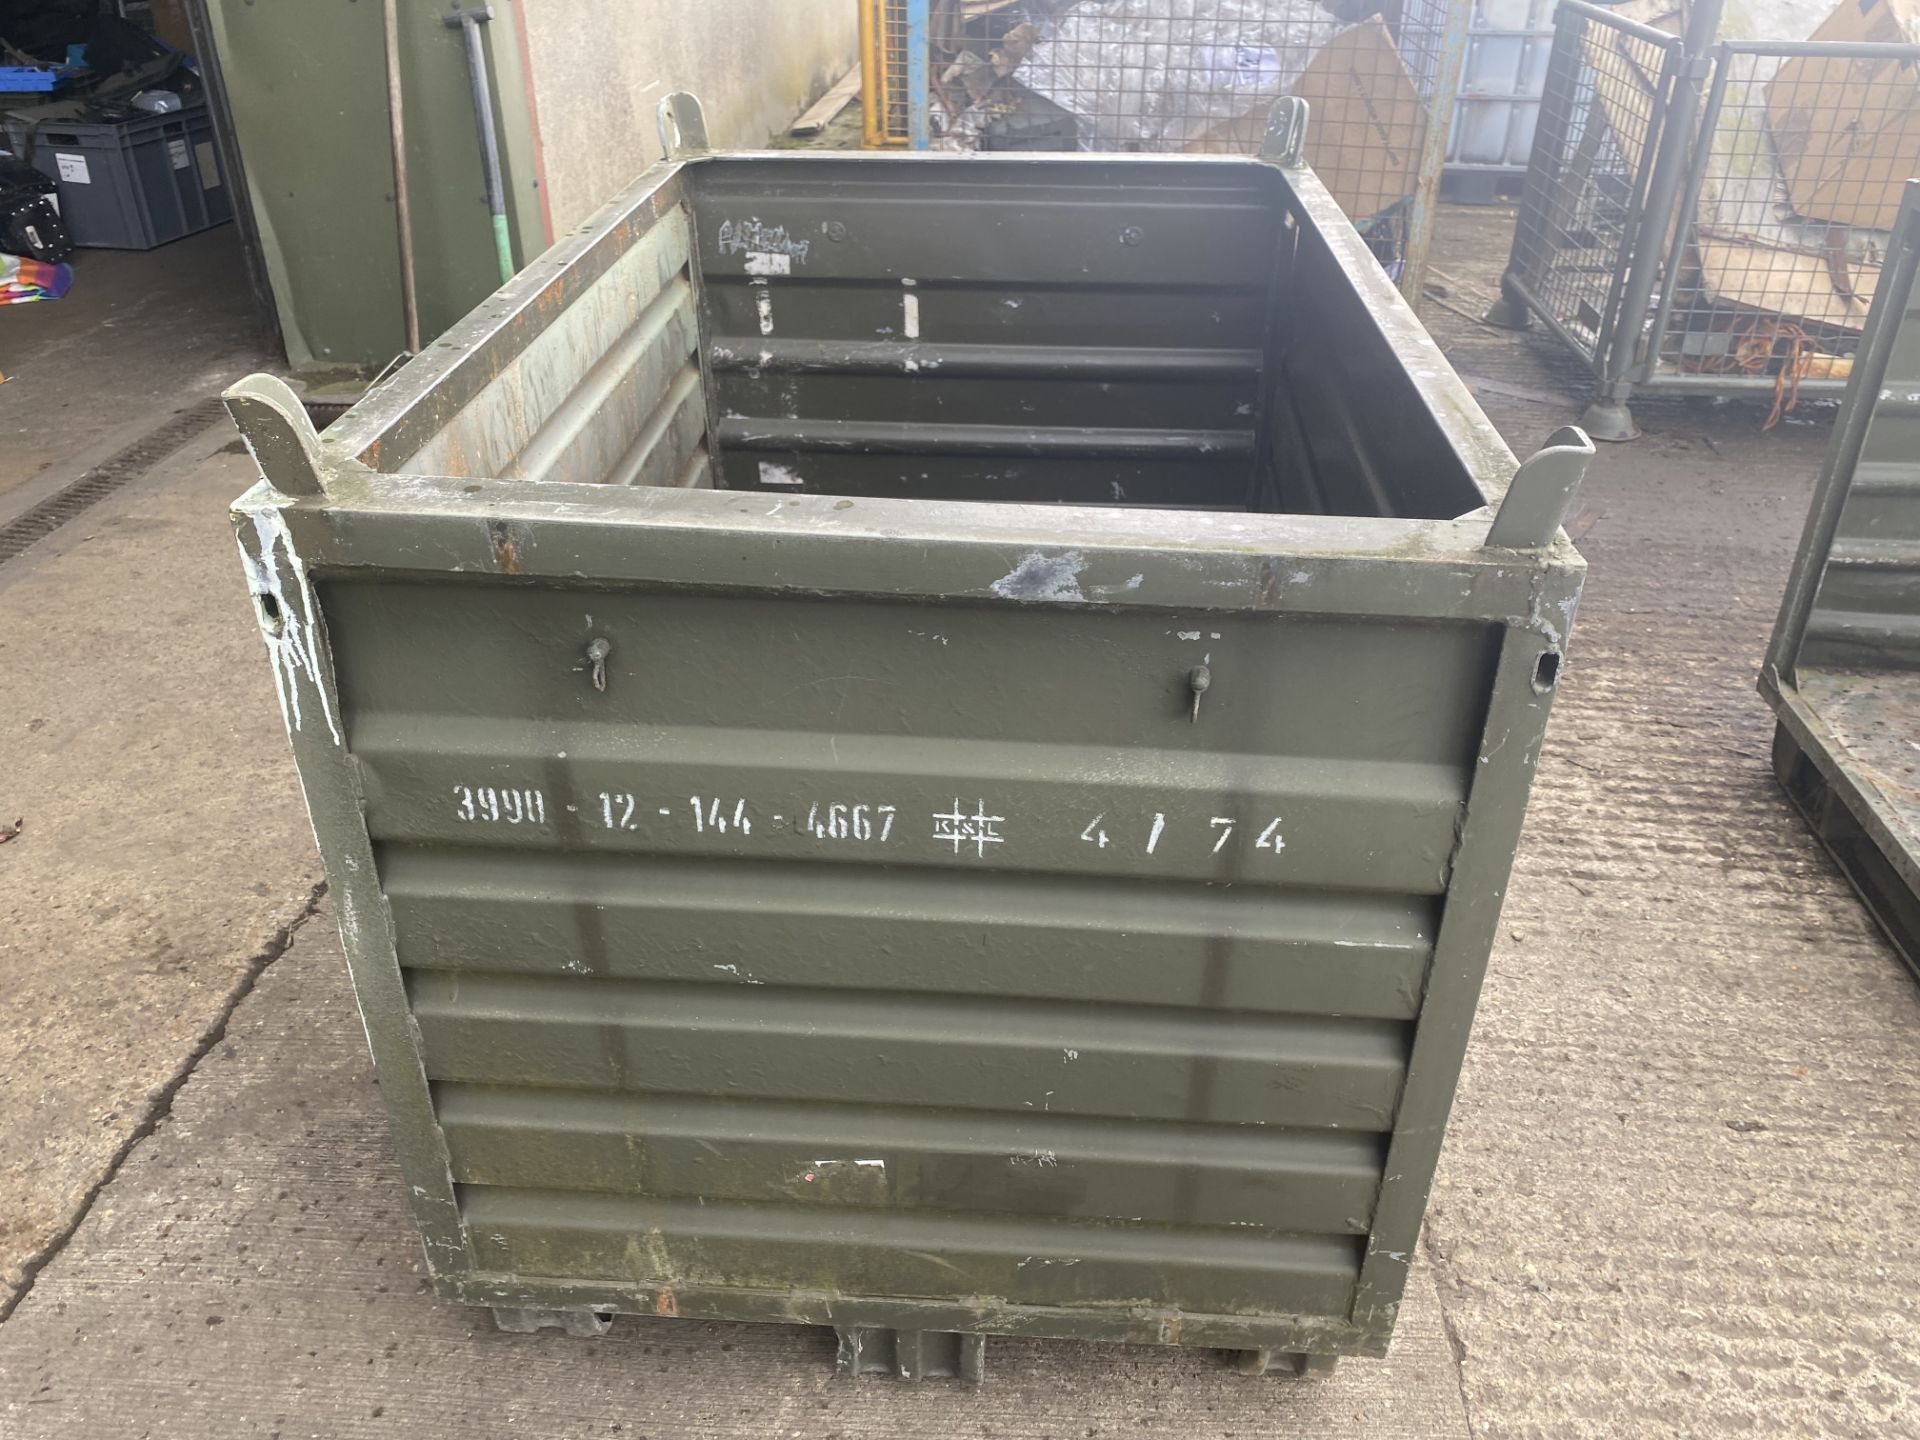 1 x Metal Storage / Transport Crate with Fold down side, Size 130 x 90 x 90 cm - Image 2 of 6